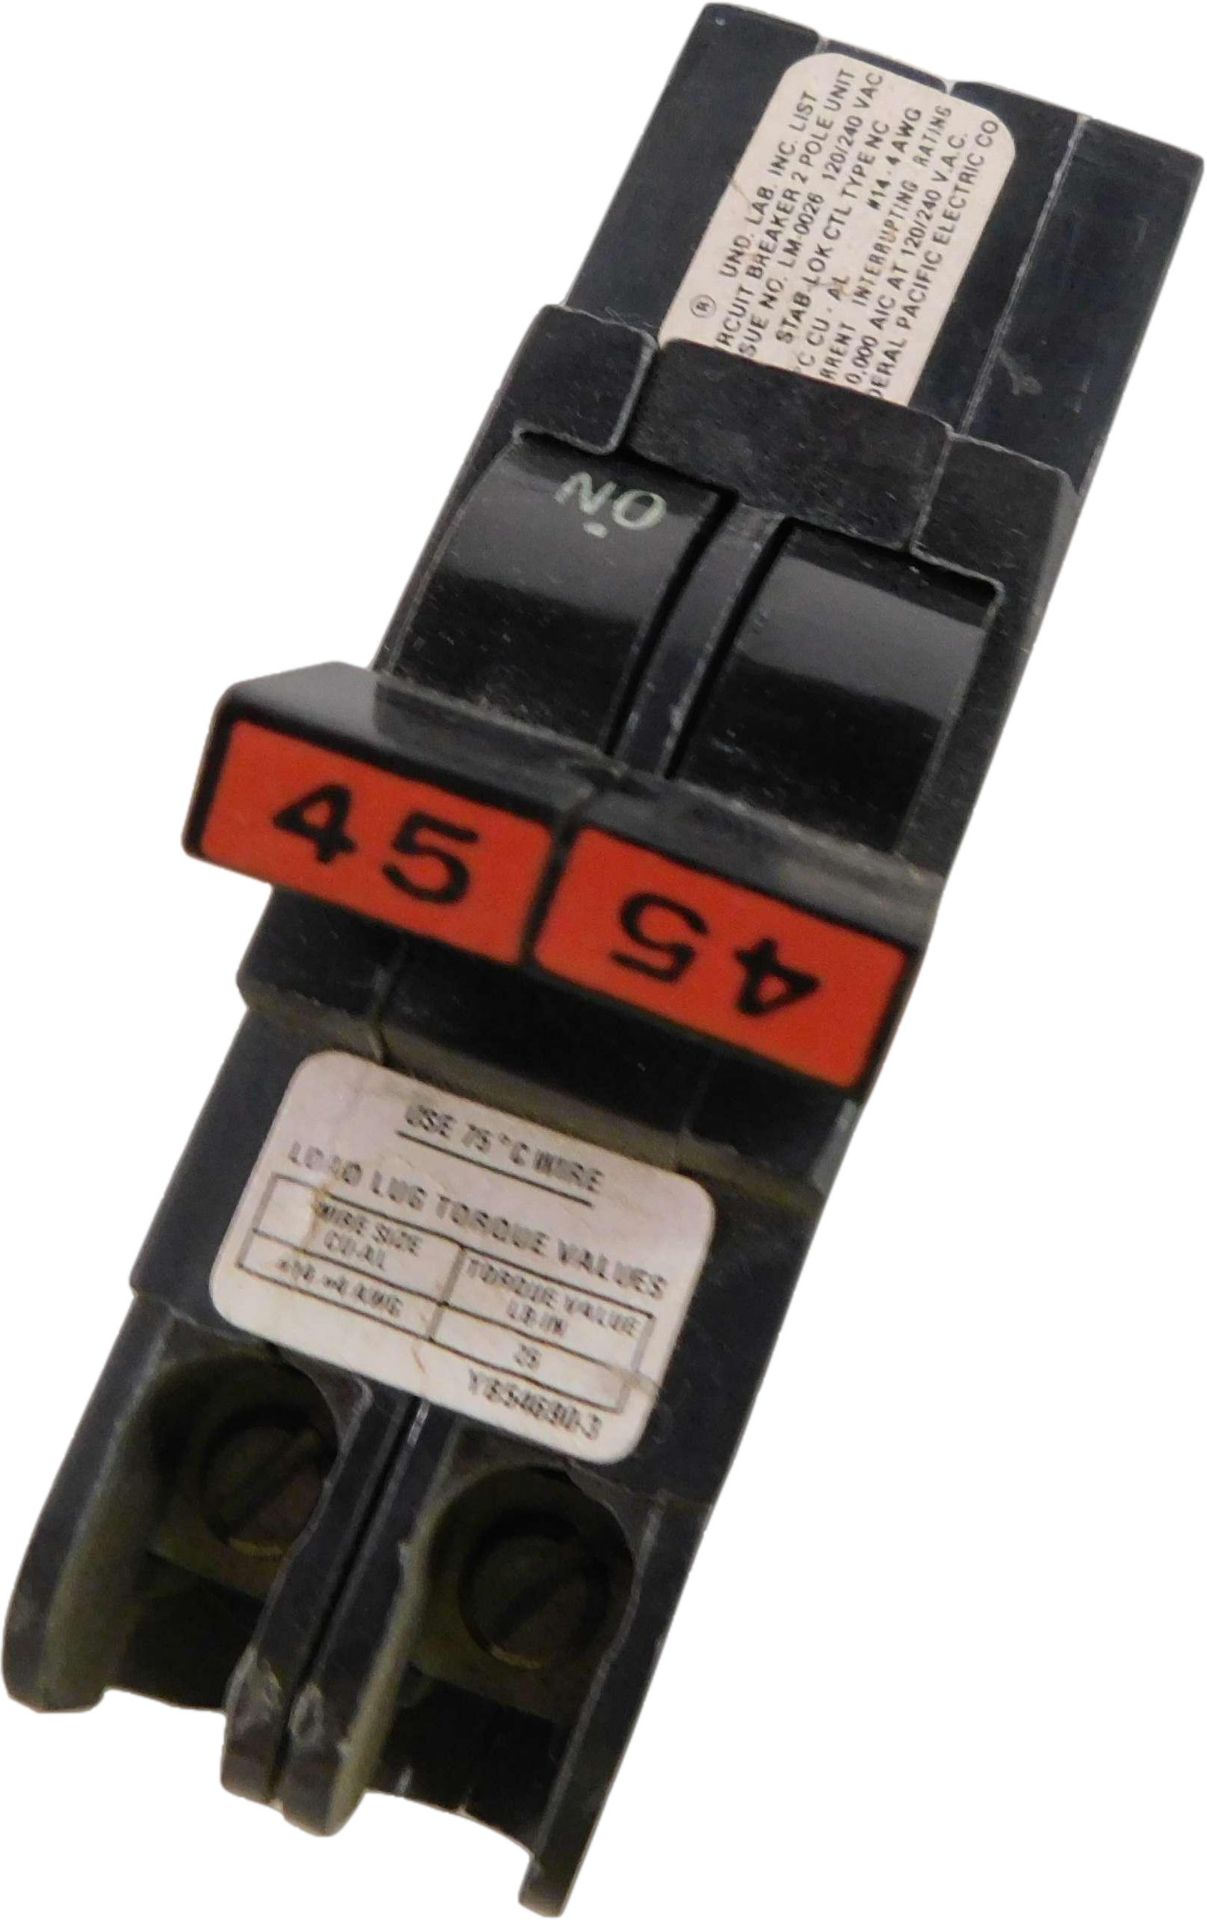 2x Federal Pacific Electric 0245 Miniature Circuit Breakers (MCBs) 2P 45A 240V 50/60Hz 1Ph